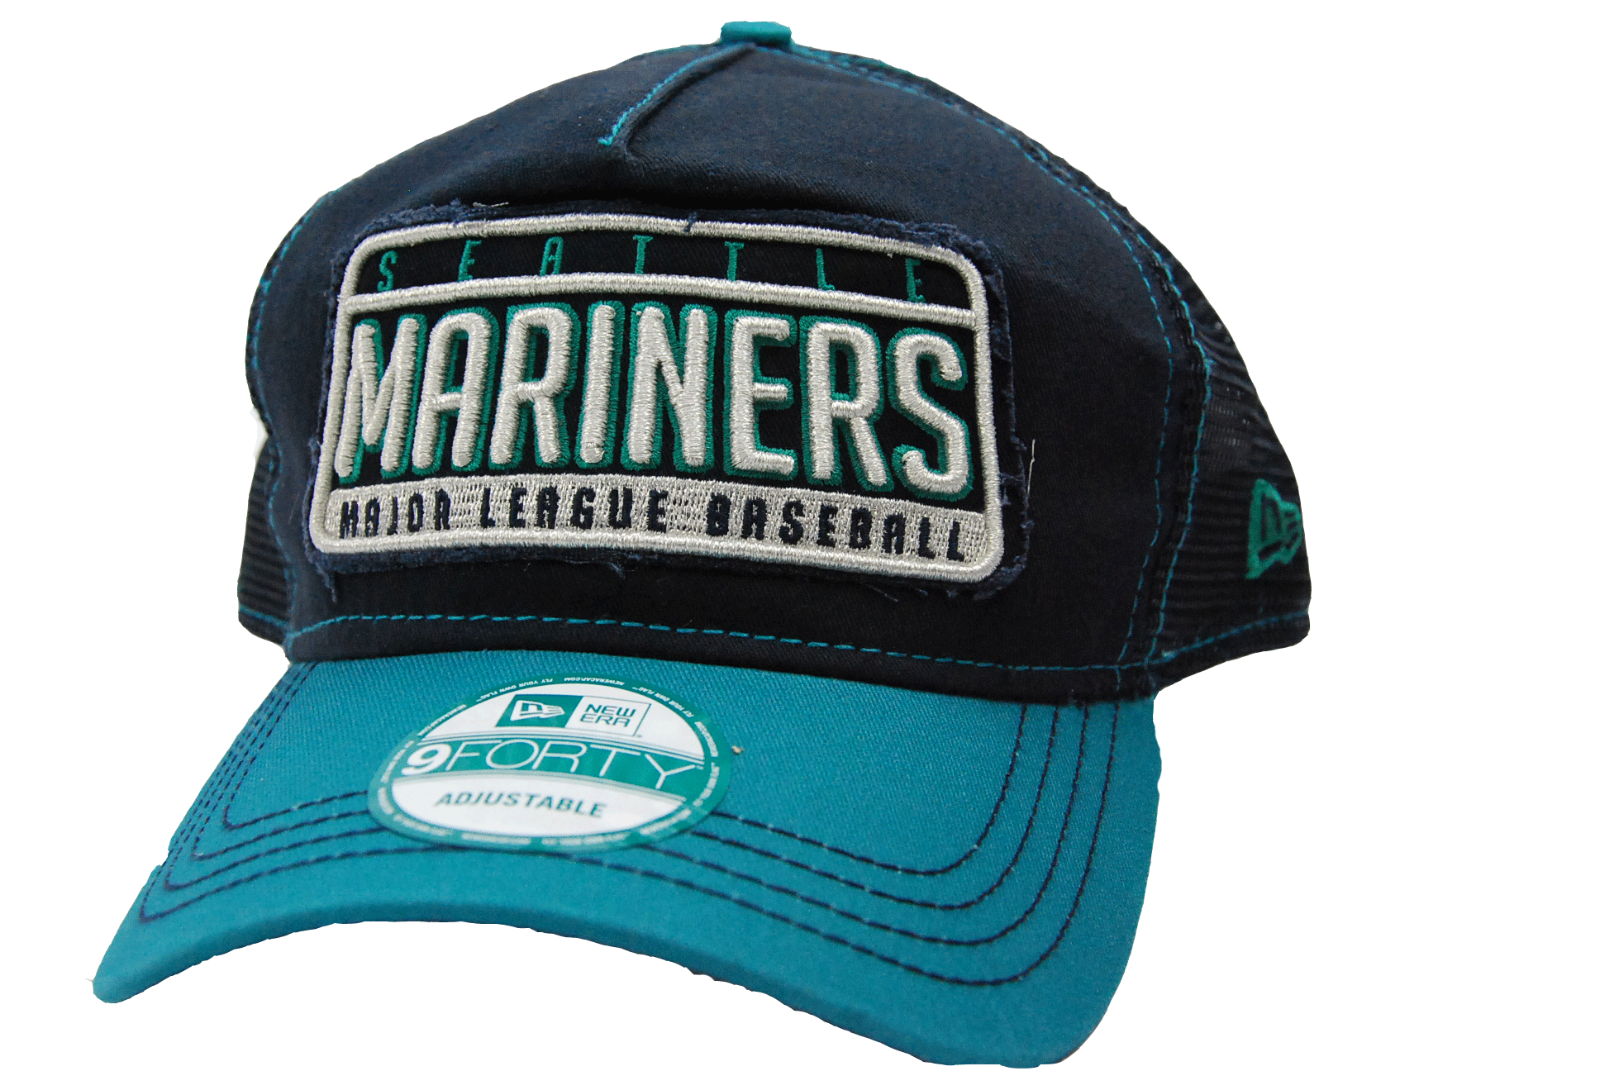 Men's New Era White Seattle Mariners League II 9FORTY Adjustable Hat